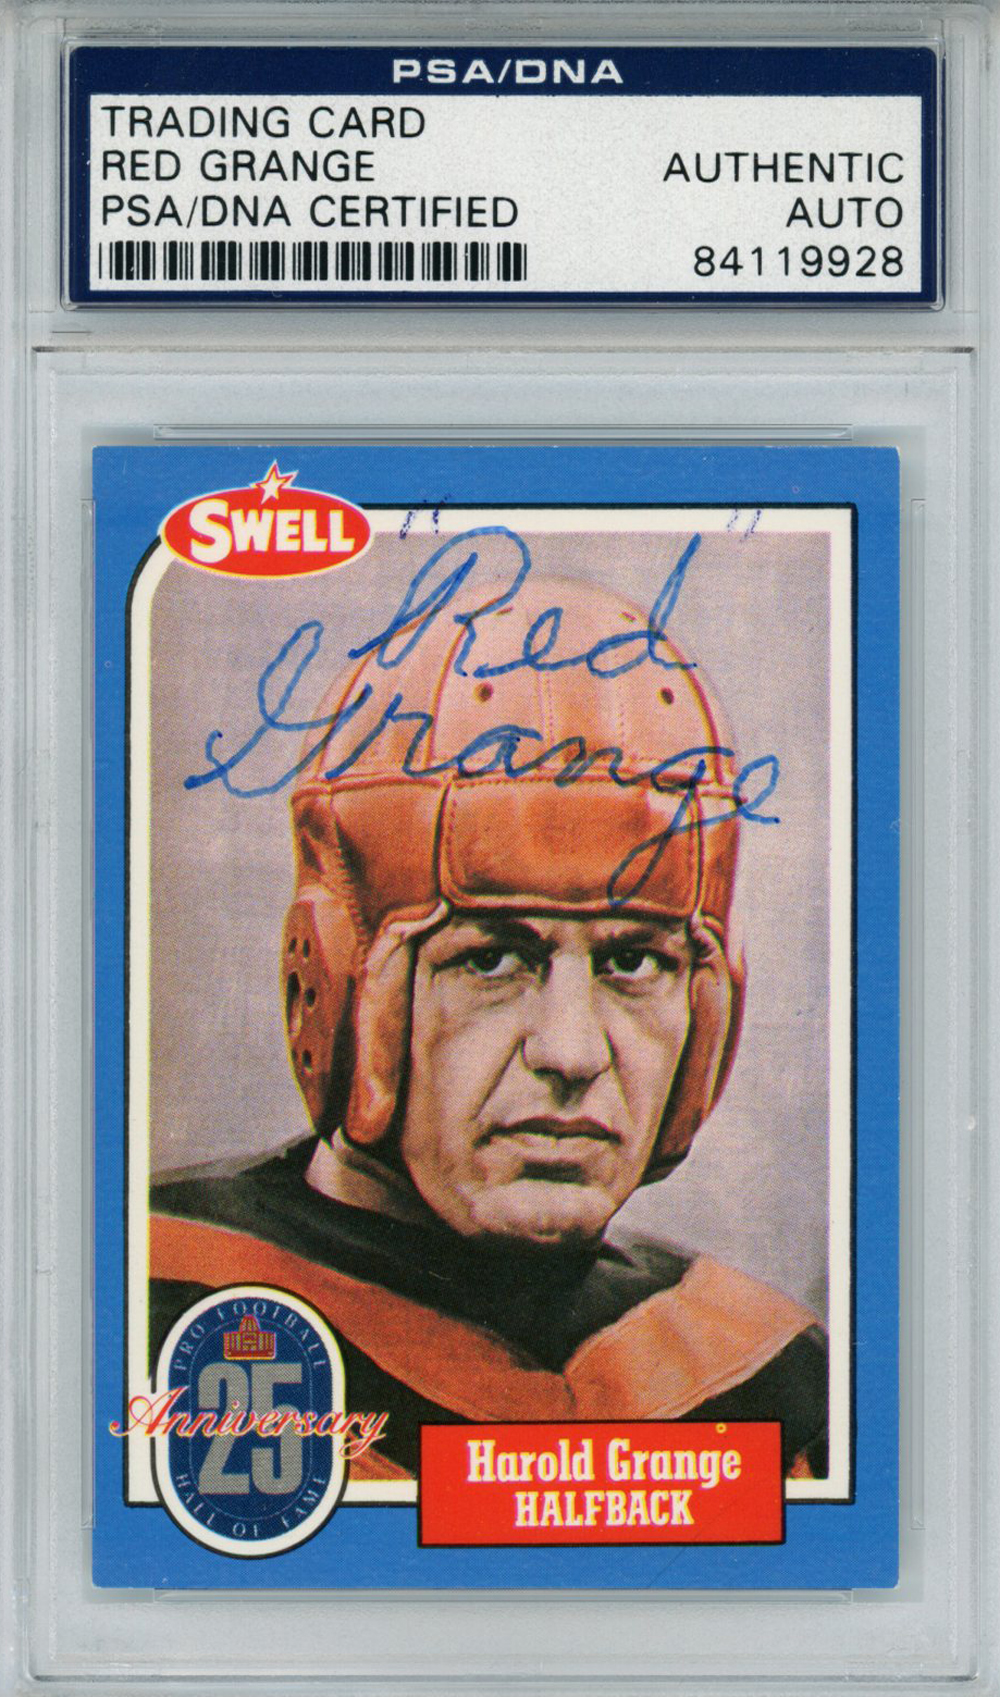 Red Grange Autographed/Signed 1988 Swell #42 Trading Card PSA Slab 32999